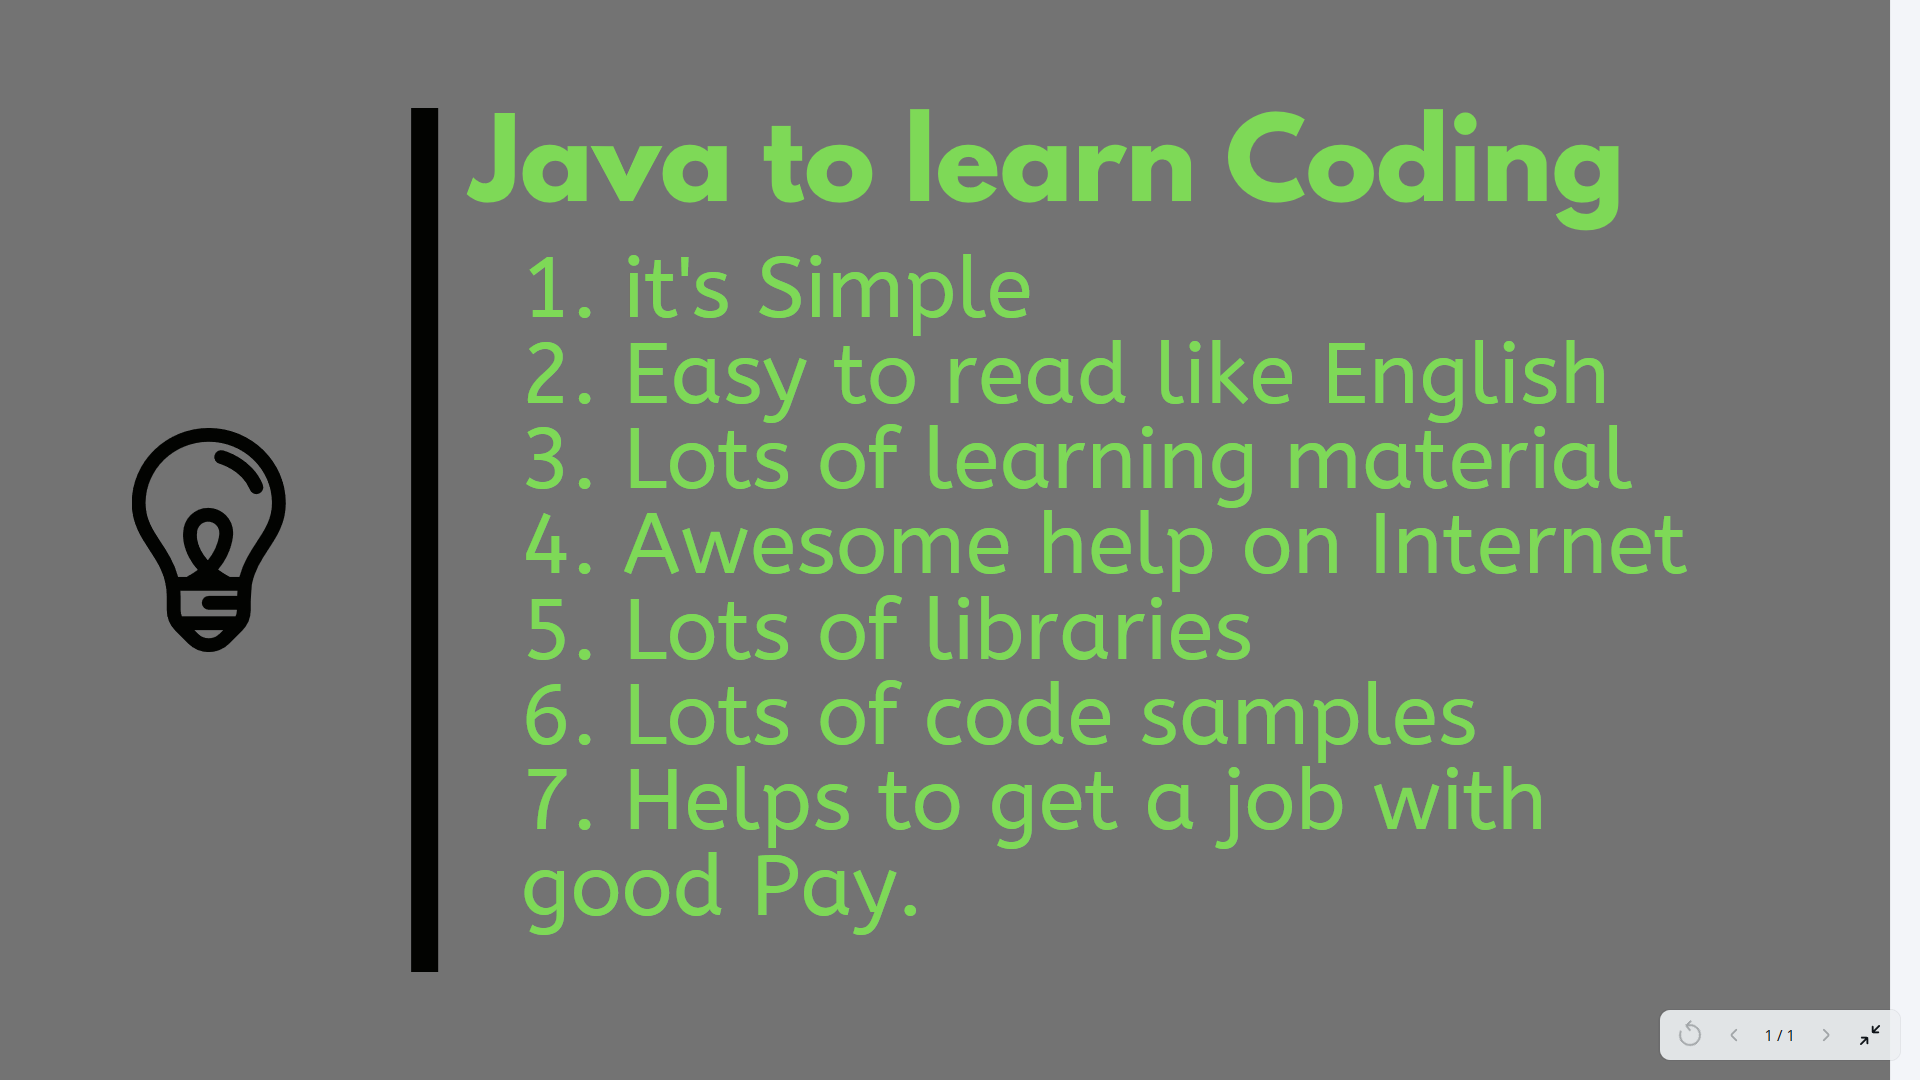 Reasons to learn Java